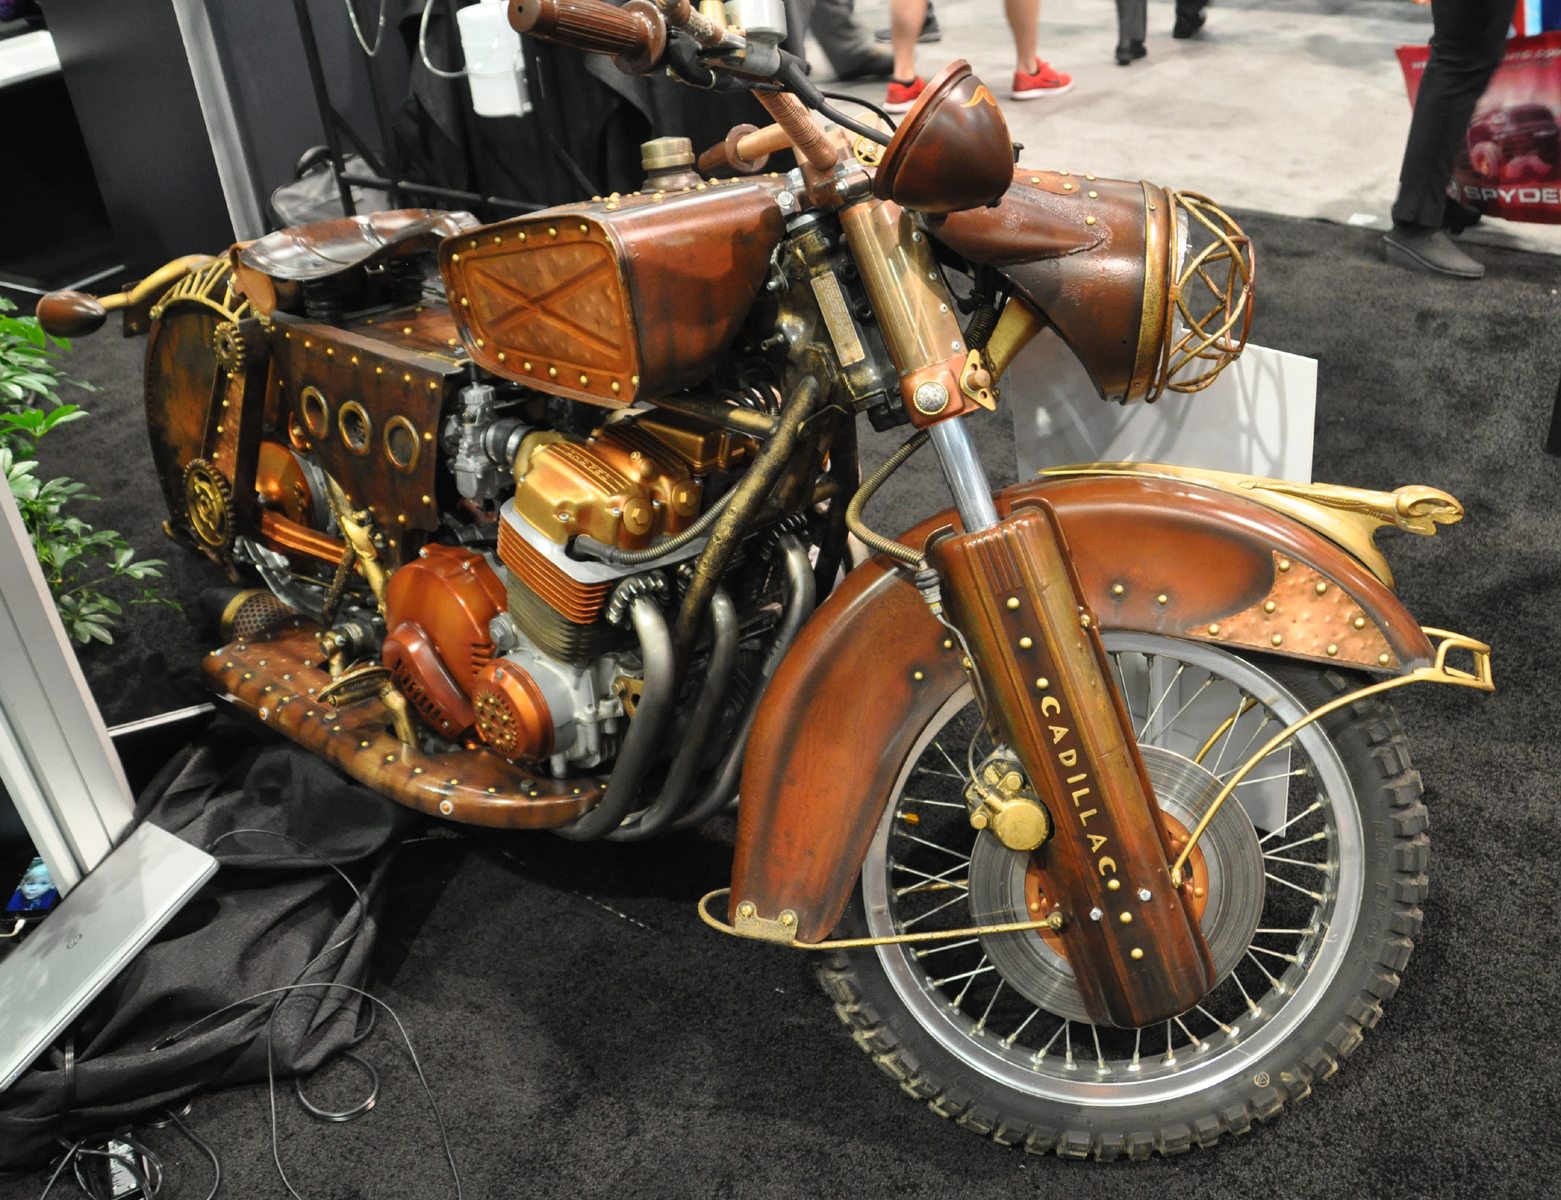 A motorcycle customised in a steampunk style